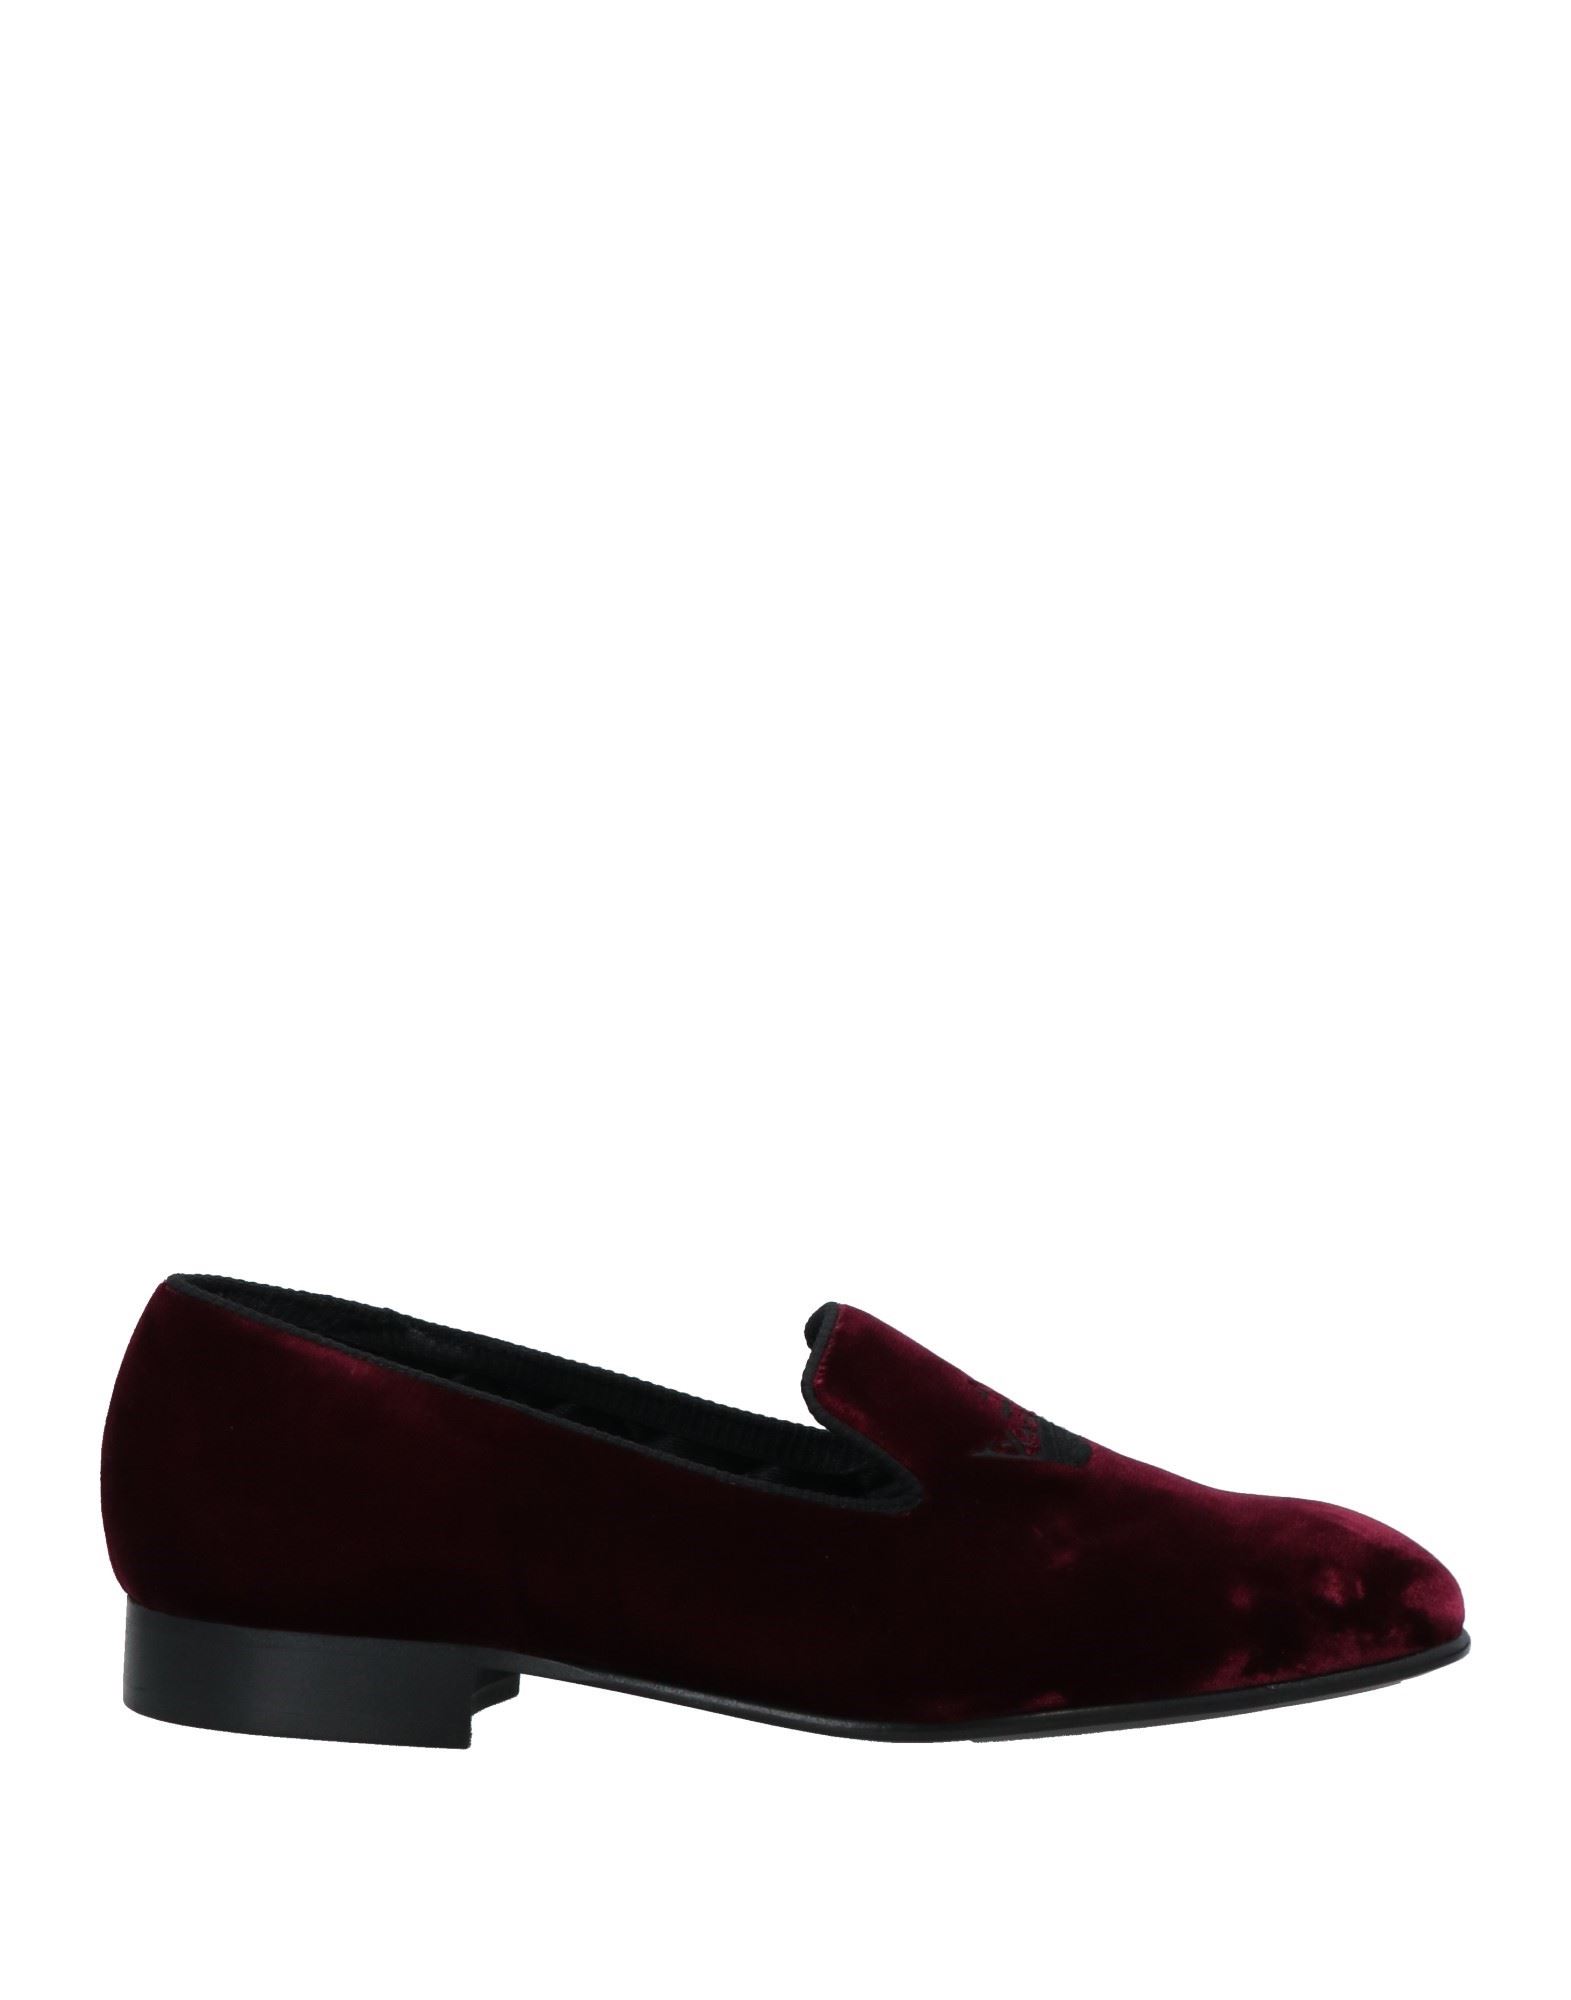 Church's Man Loafers Burgundy Size 7 Textile Fibers In Red